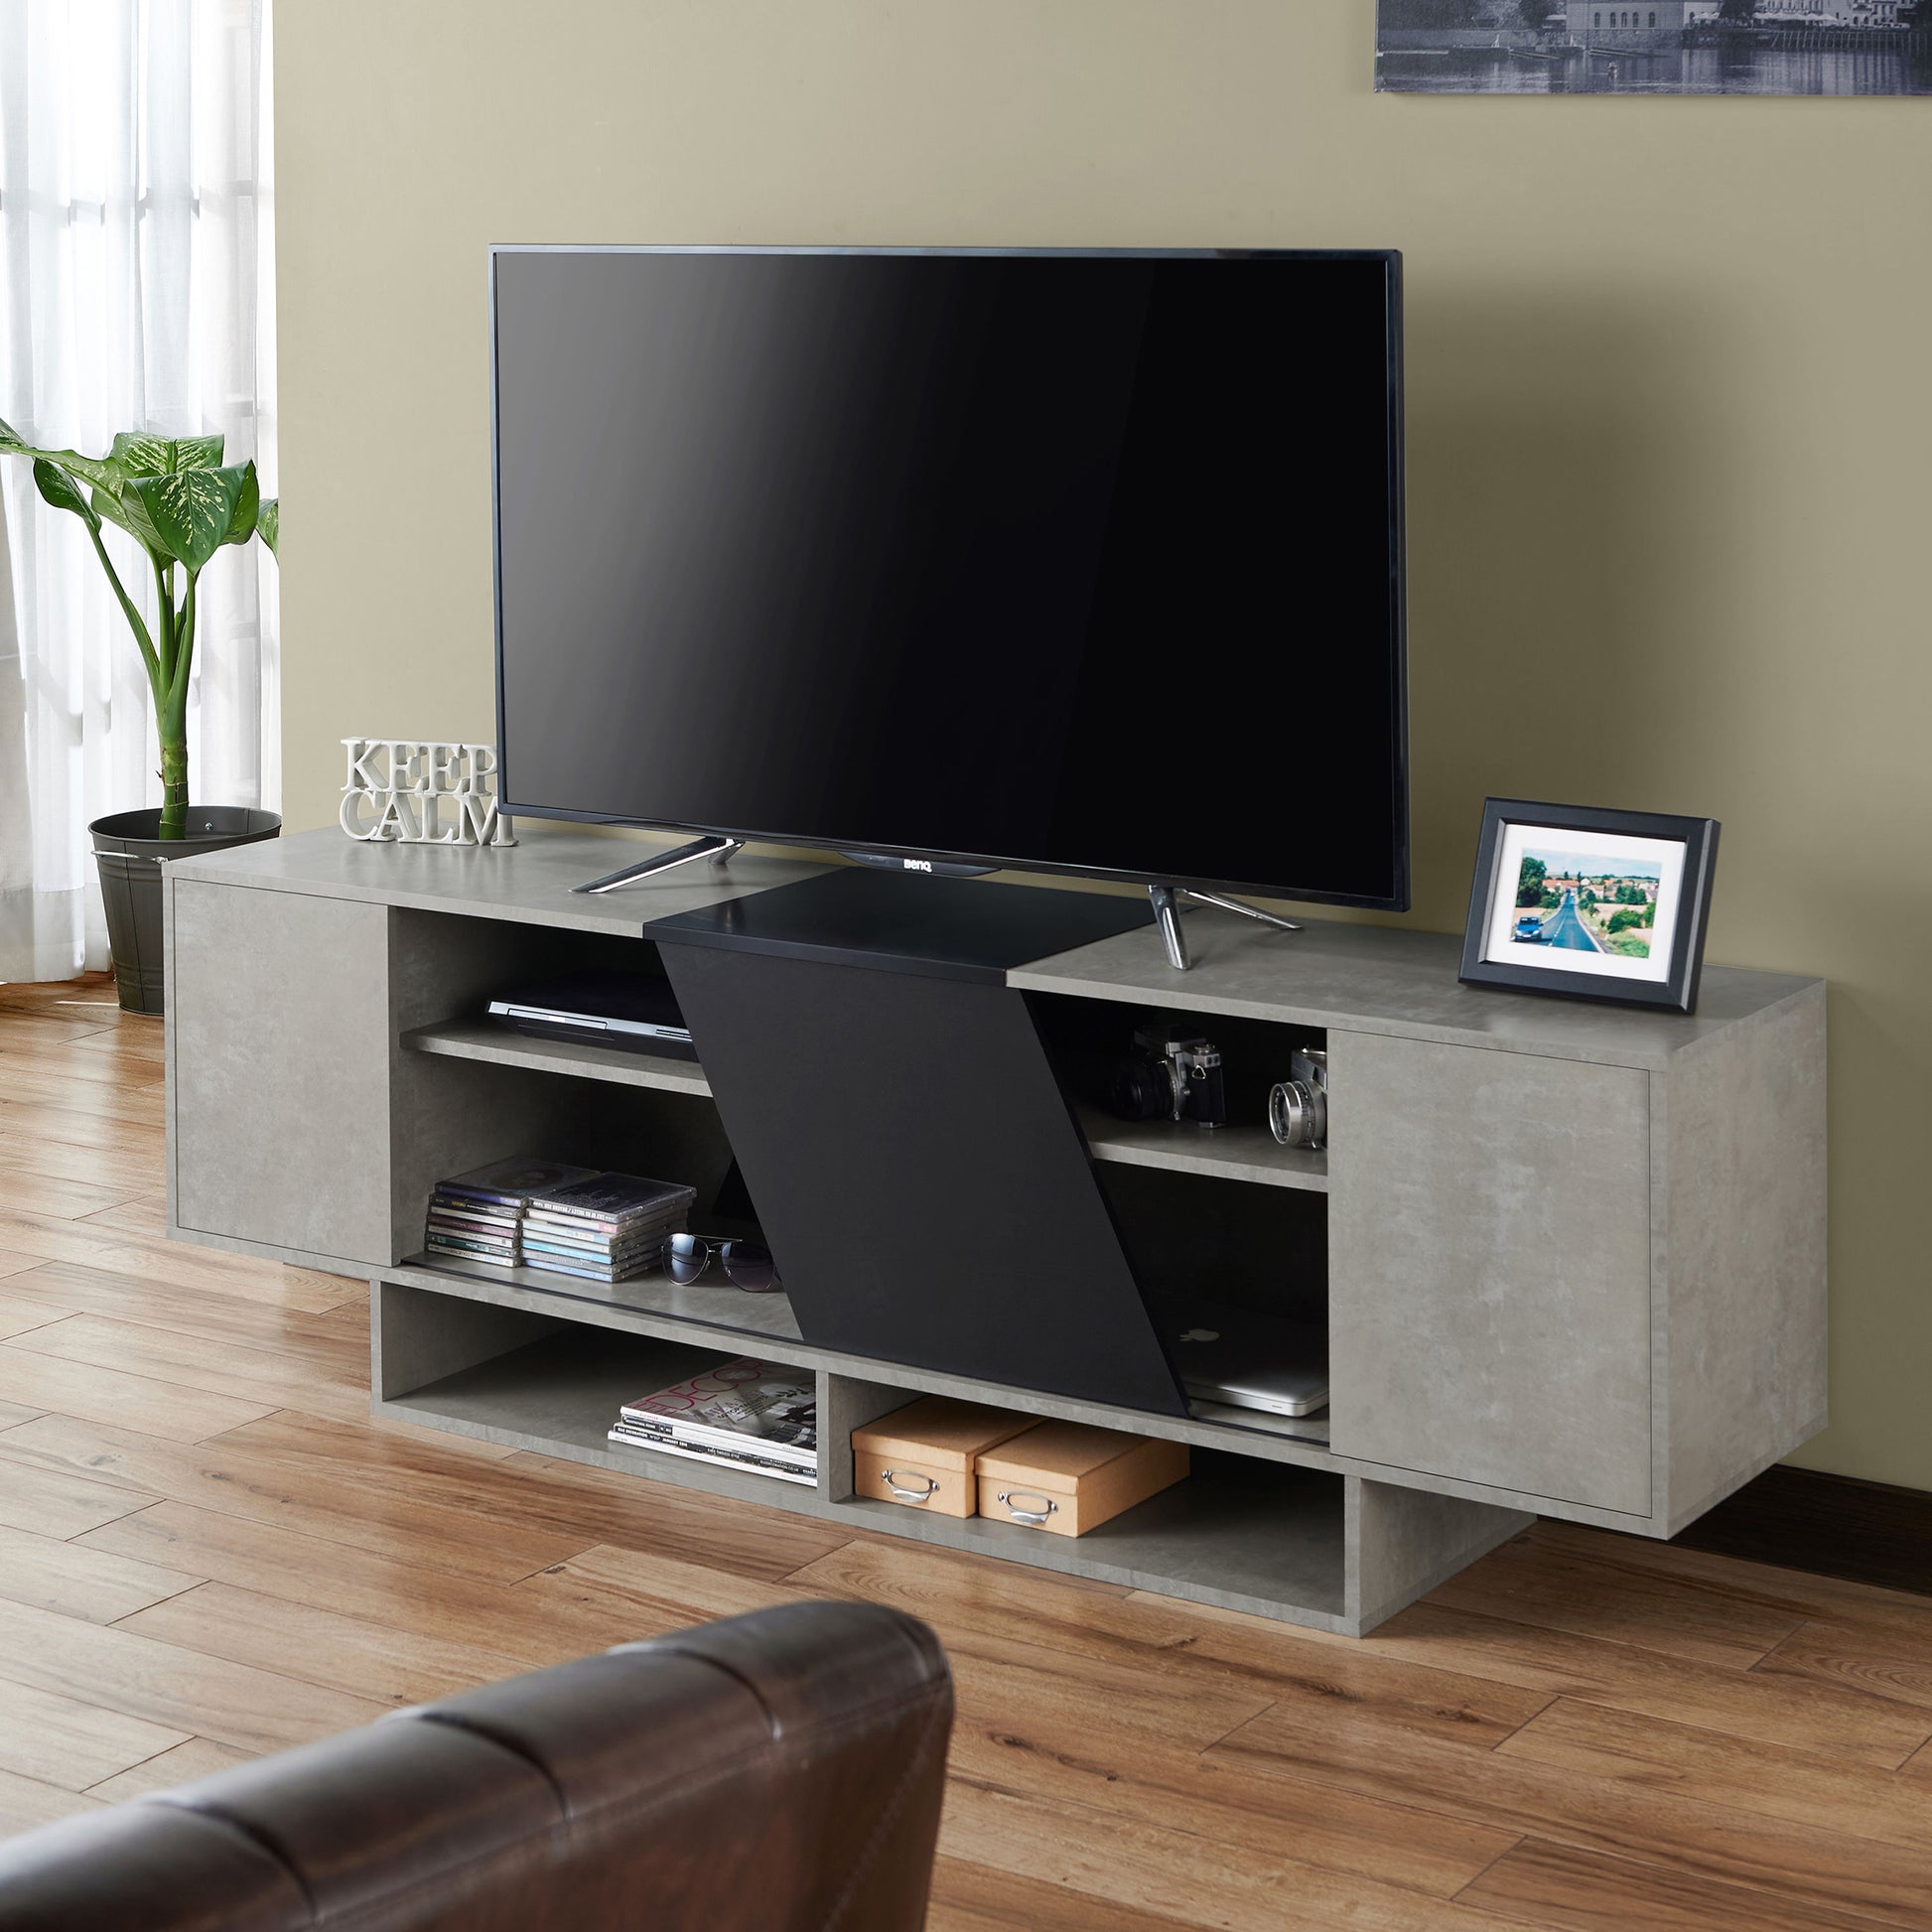 Left angled modern cement gray and black six-shelf TV stand in a living room with accessories